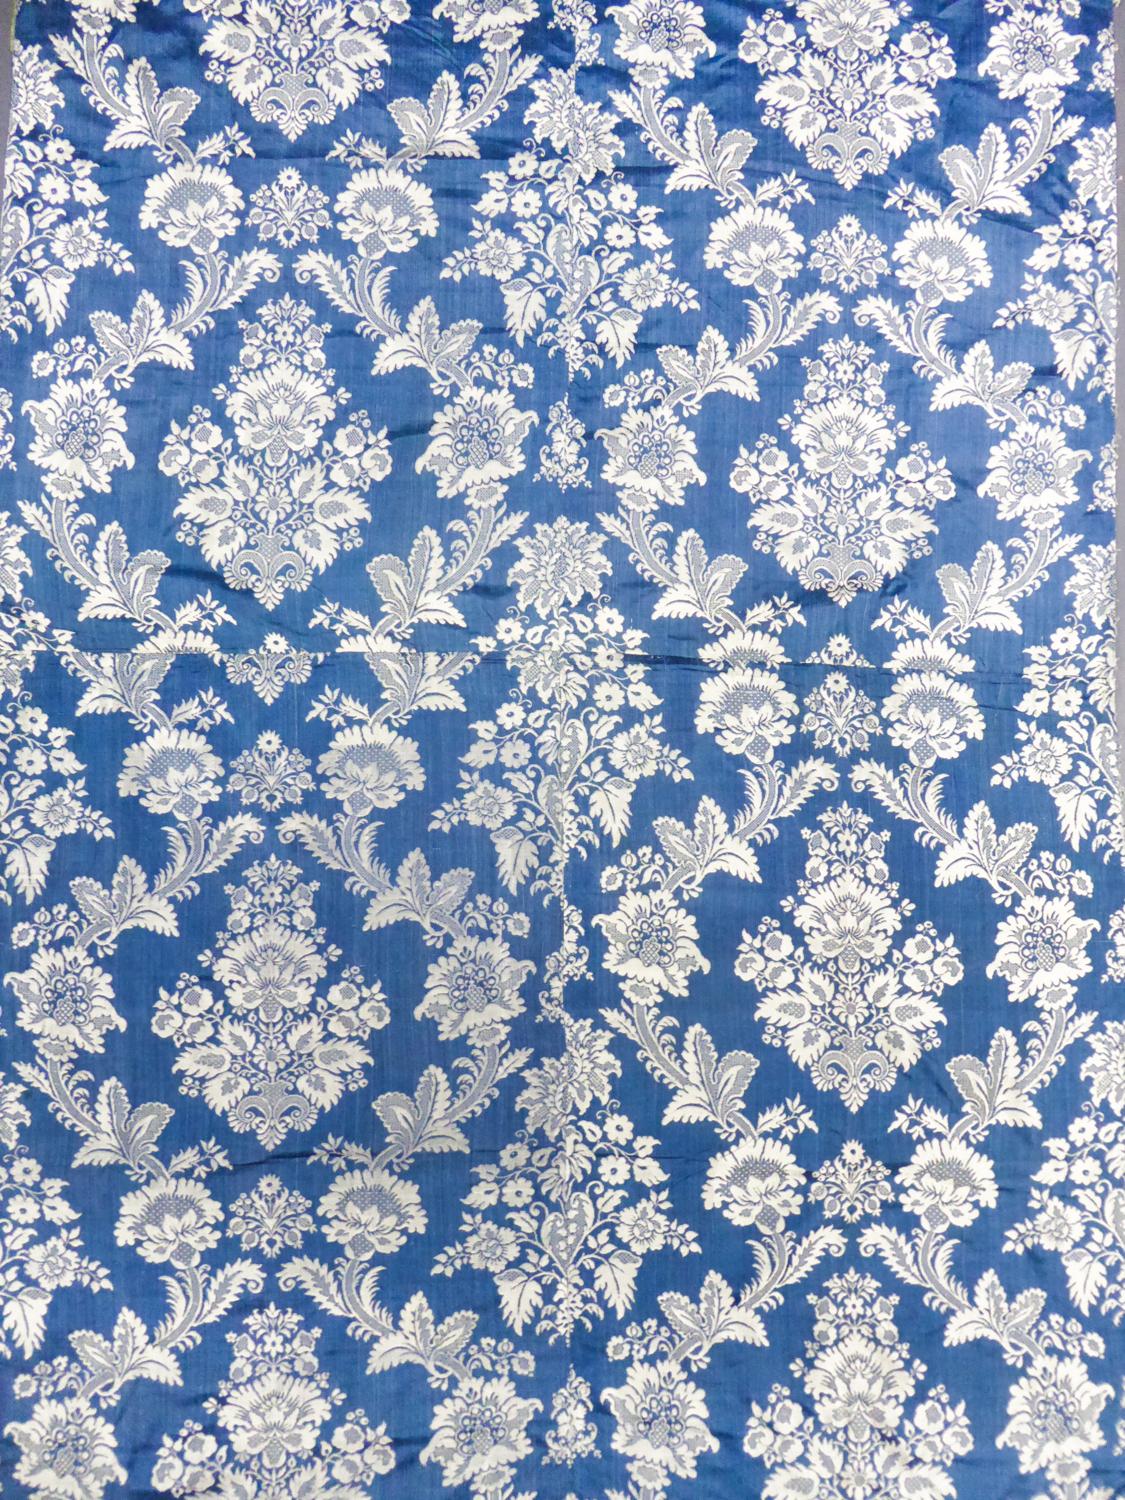 Circa 1730/1750
France

Beautiful reversible silk lampas with a French blue background and damask effect, characteristic of Lyon production under the reign of Louis XV in France. Decor with bouquets of blooming flowers inscribed between undulating